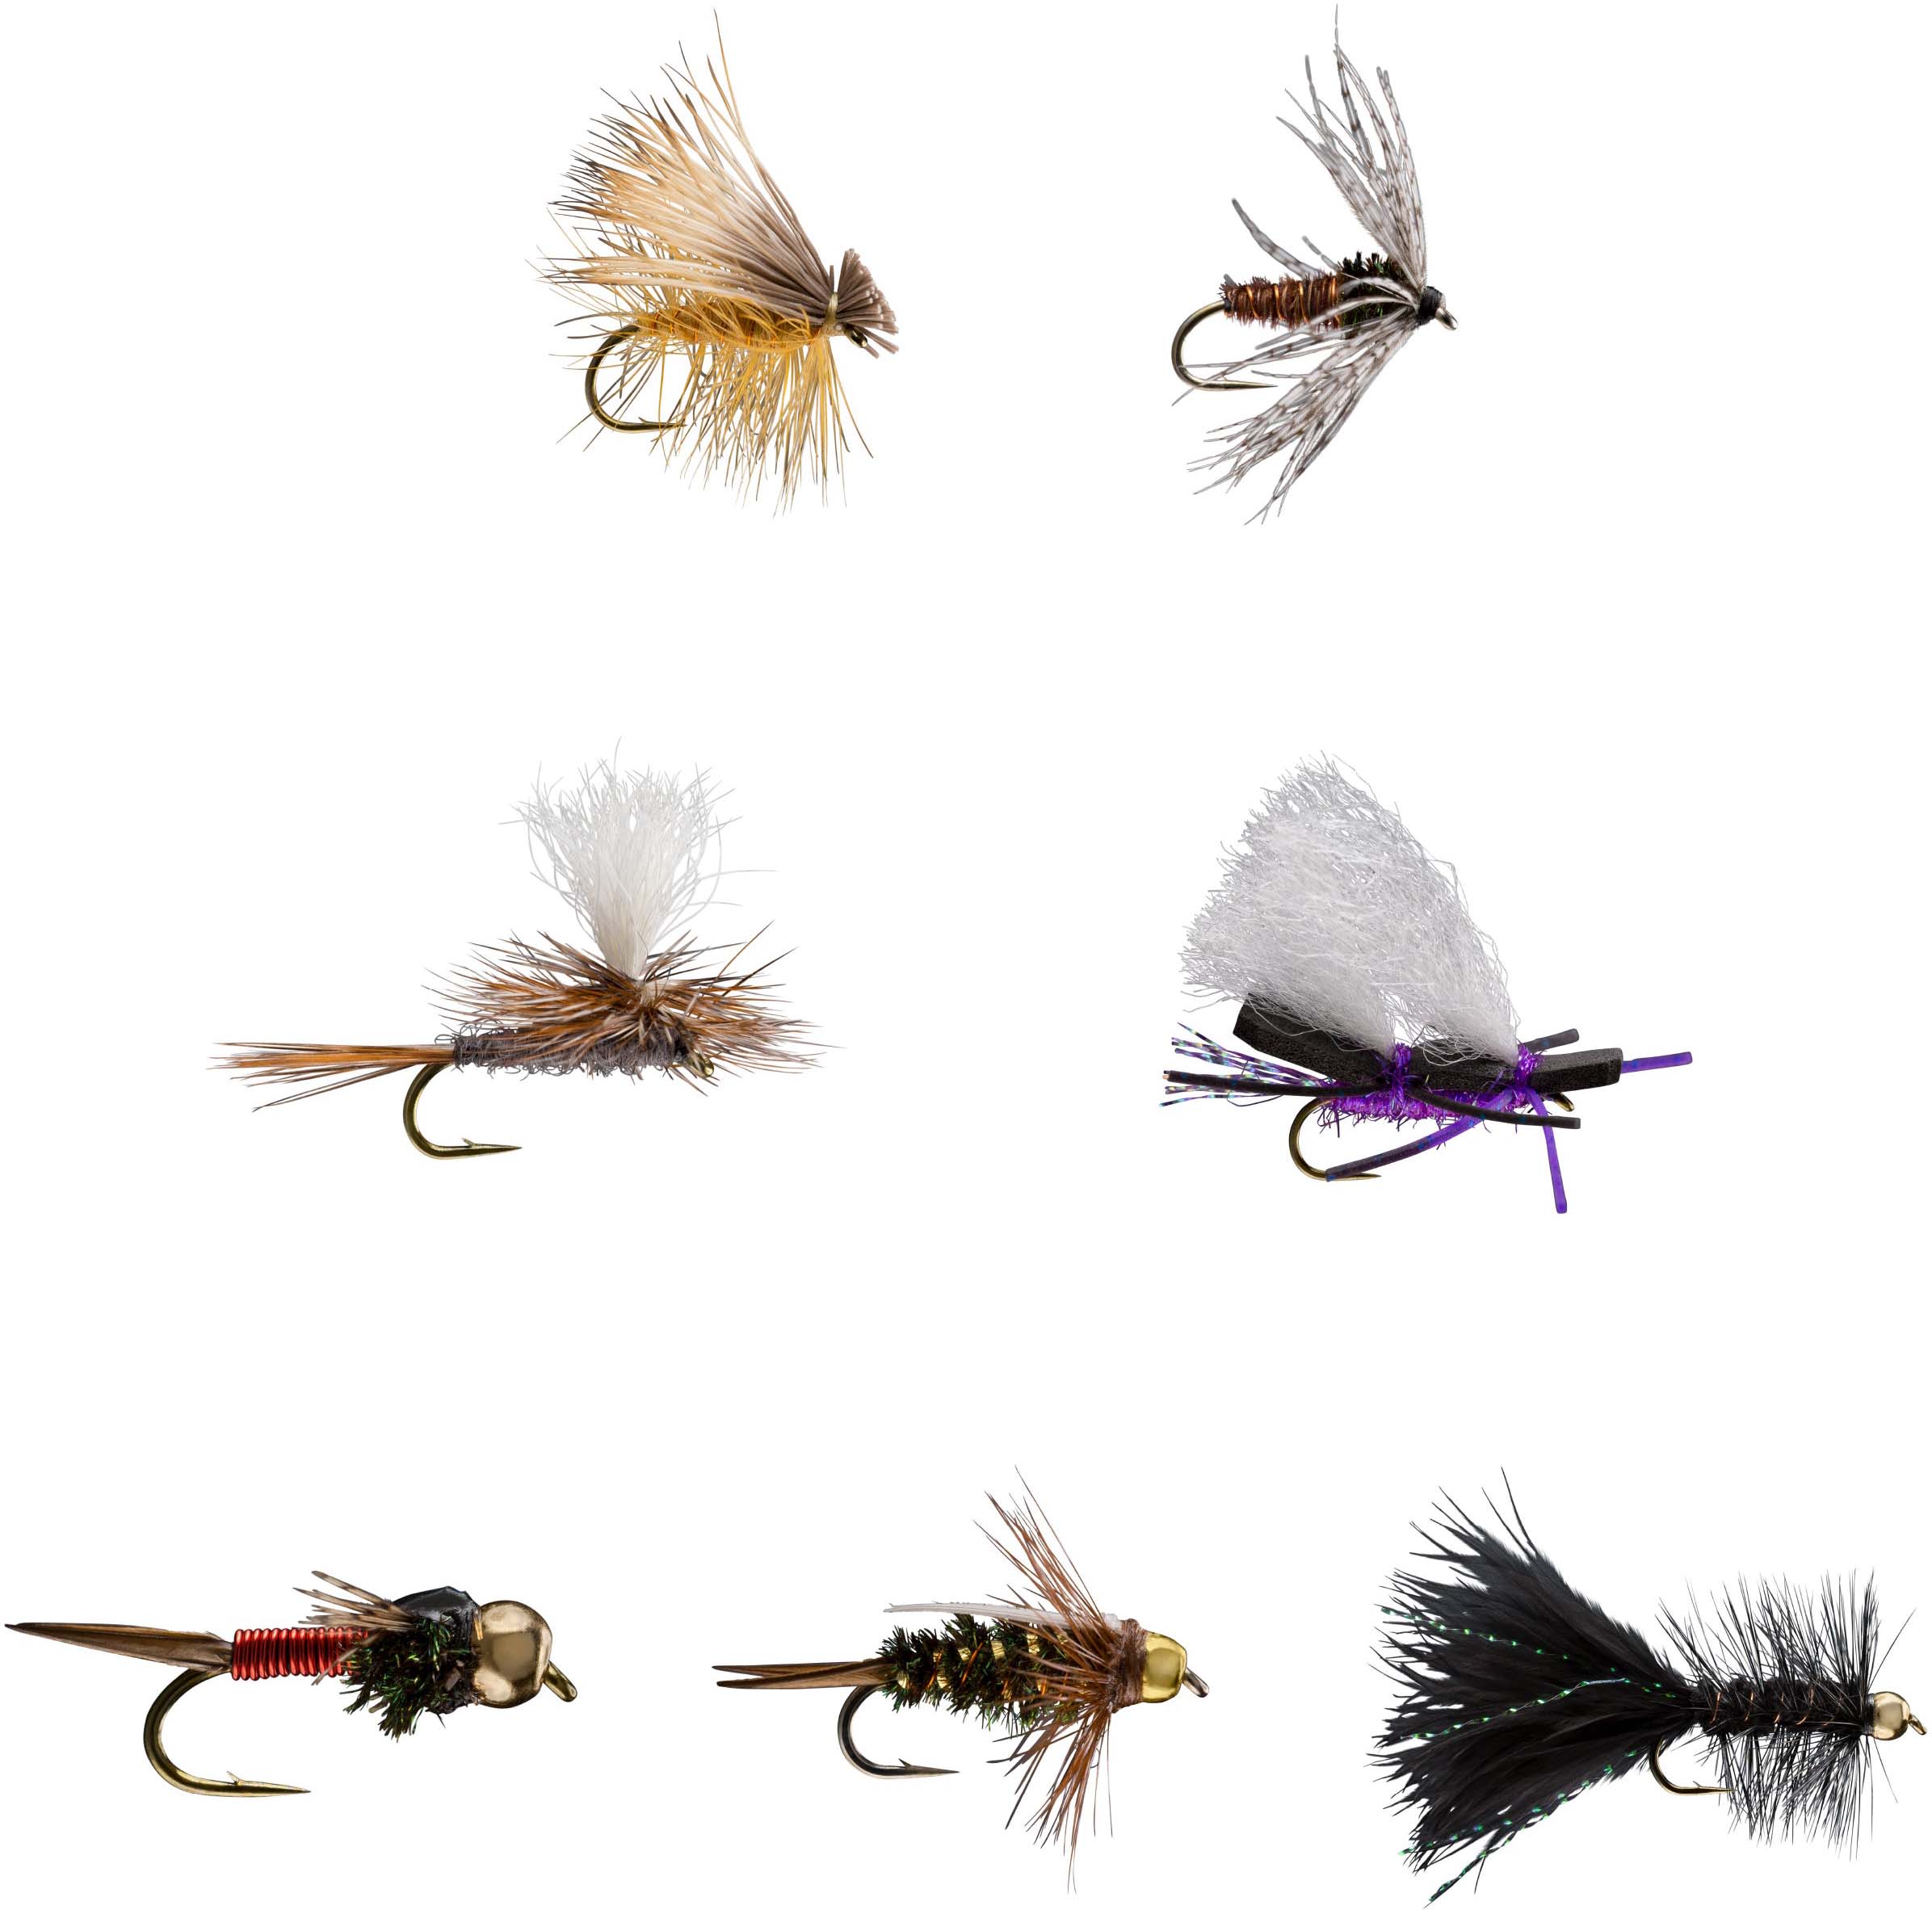 https://op2.0ps.us/original/opplanet-rio-products-basic-trout-fly-assortment-6-f32368-main